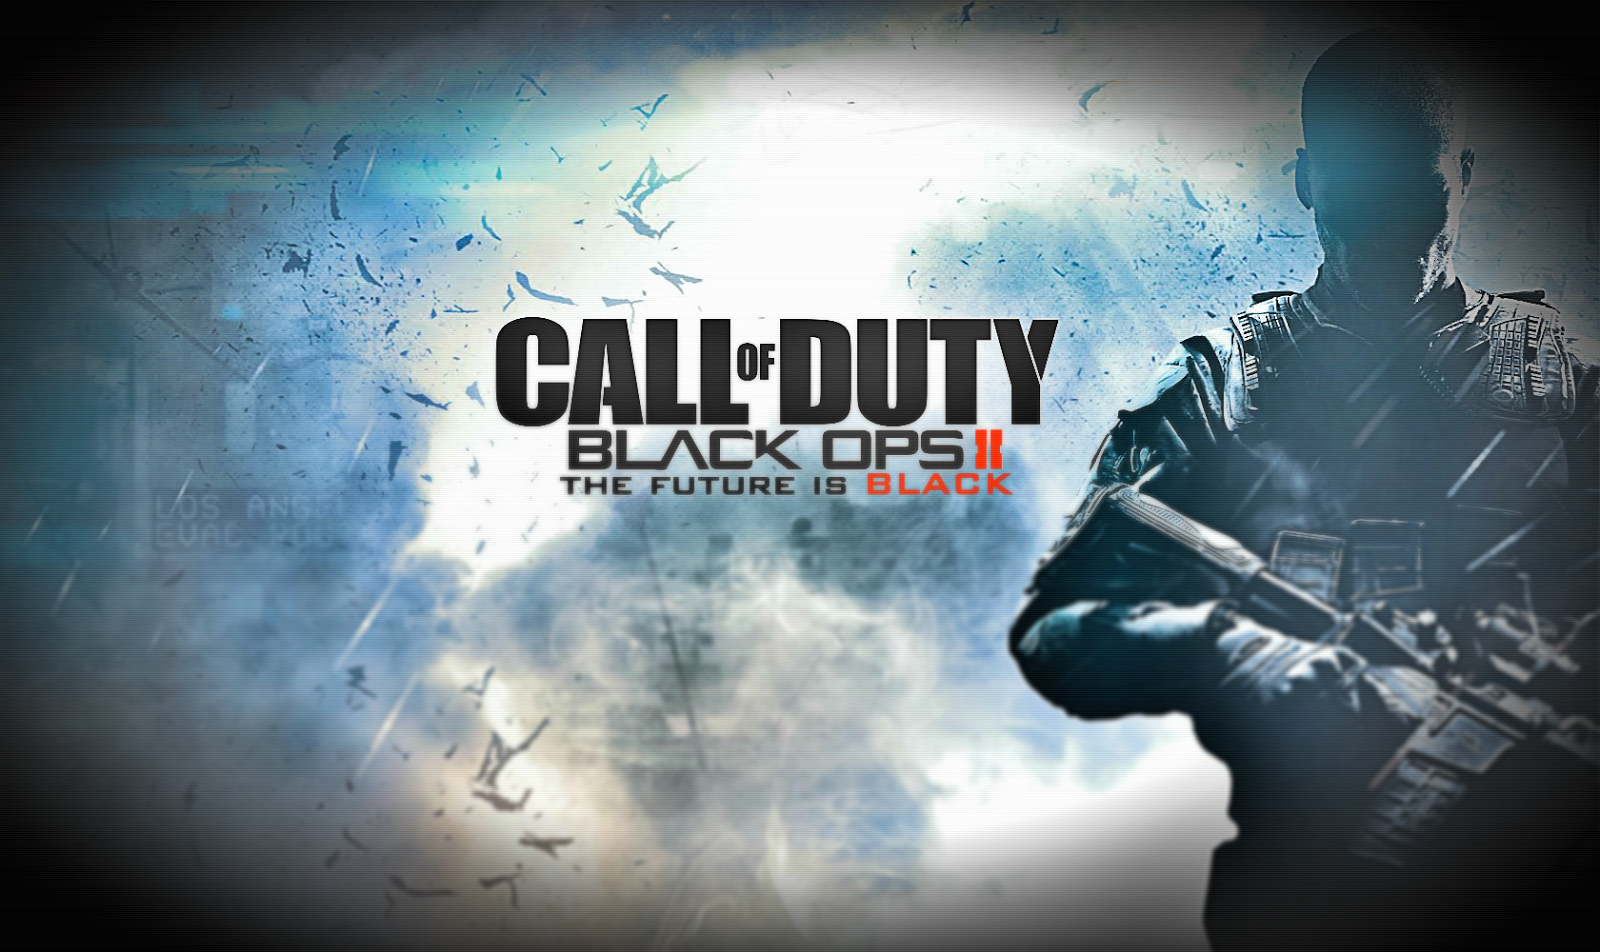 Quotes Fun And Pictures Black Ops 2 Wallpaper